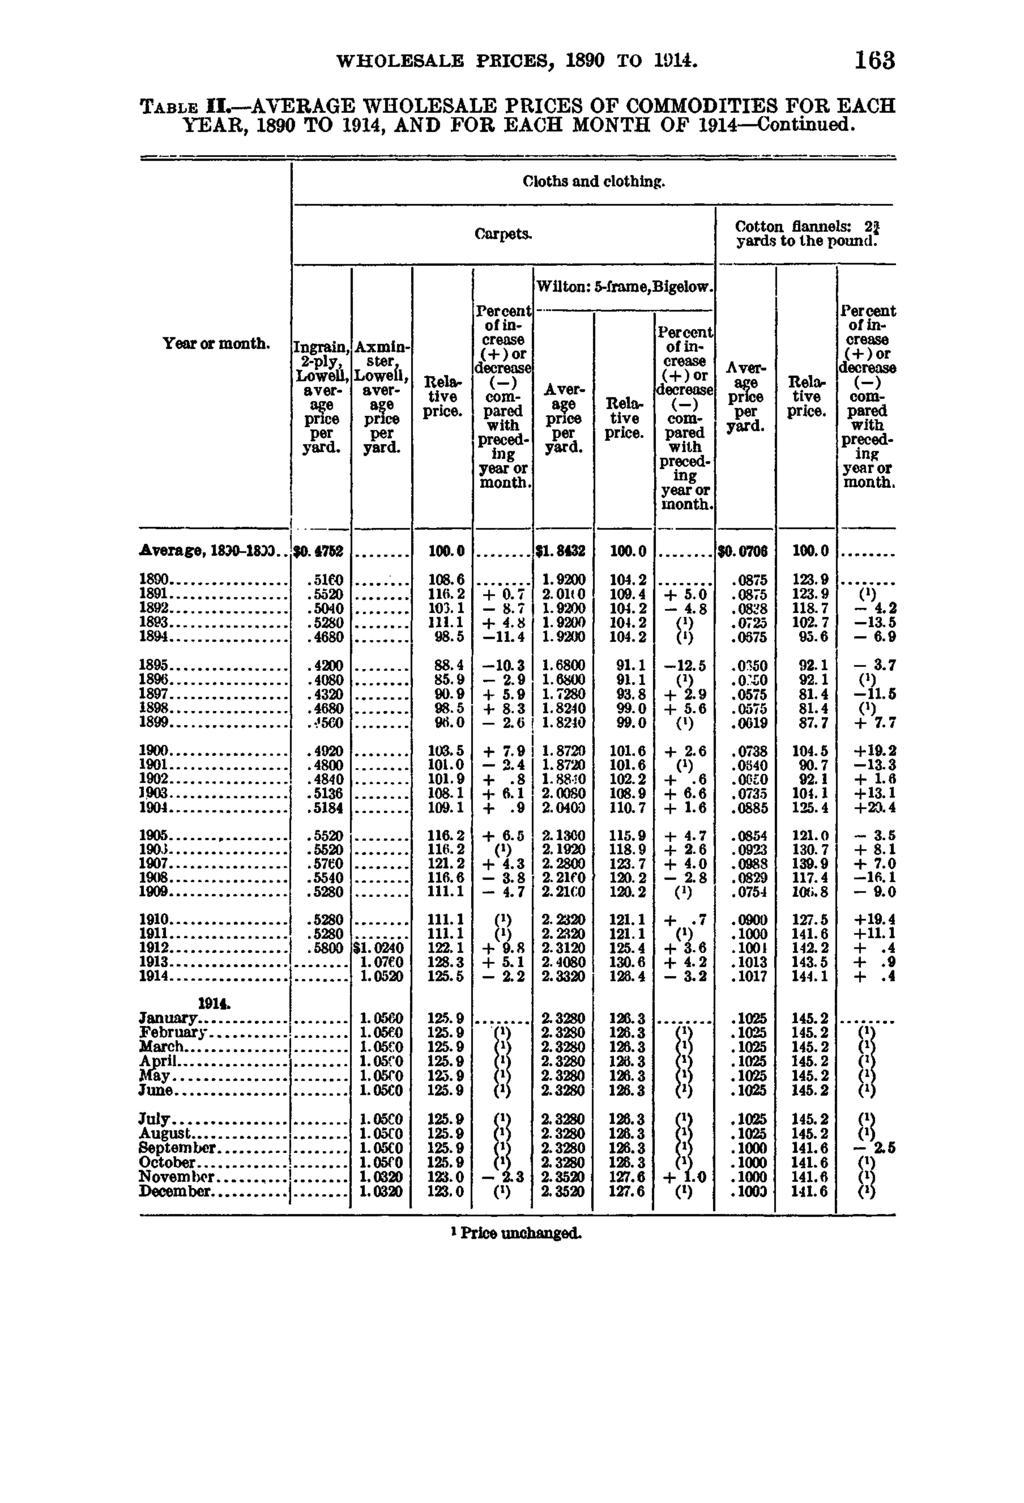 WHOLESALE PBICES, 1890 TO 163 T a b l e II. AVERAGE WHOLESALE PRICES OF COMMODITIES FOR EACH YEAR, 1890 TO 1914, AND FOR EACH MONTH OF 1914 Continued. Cloths and clothing. Carpets.